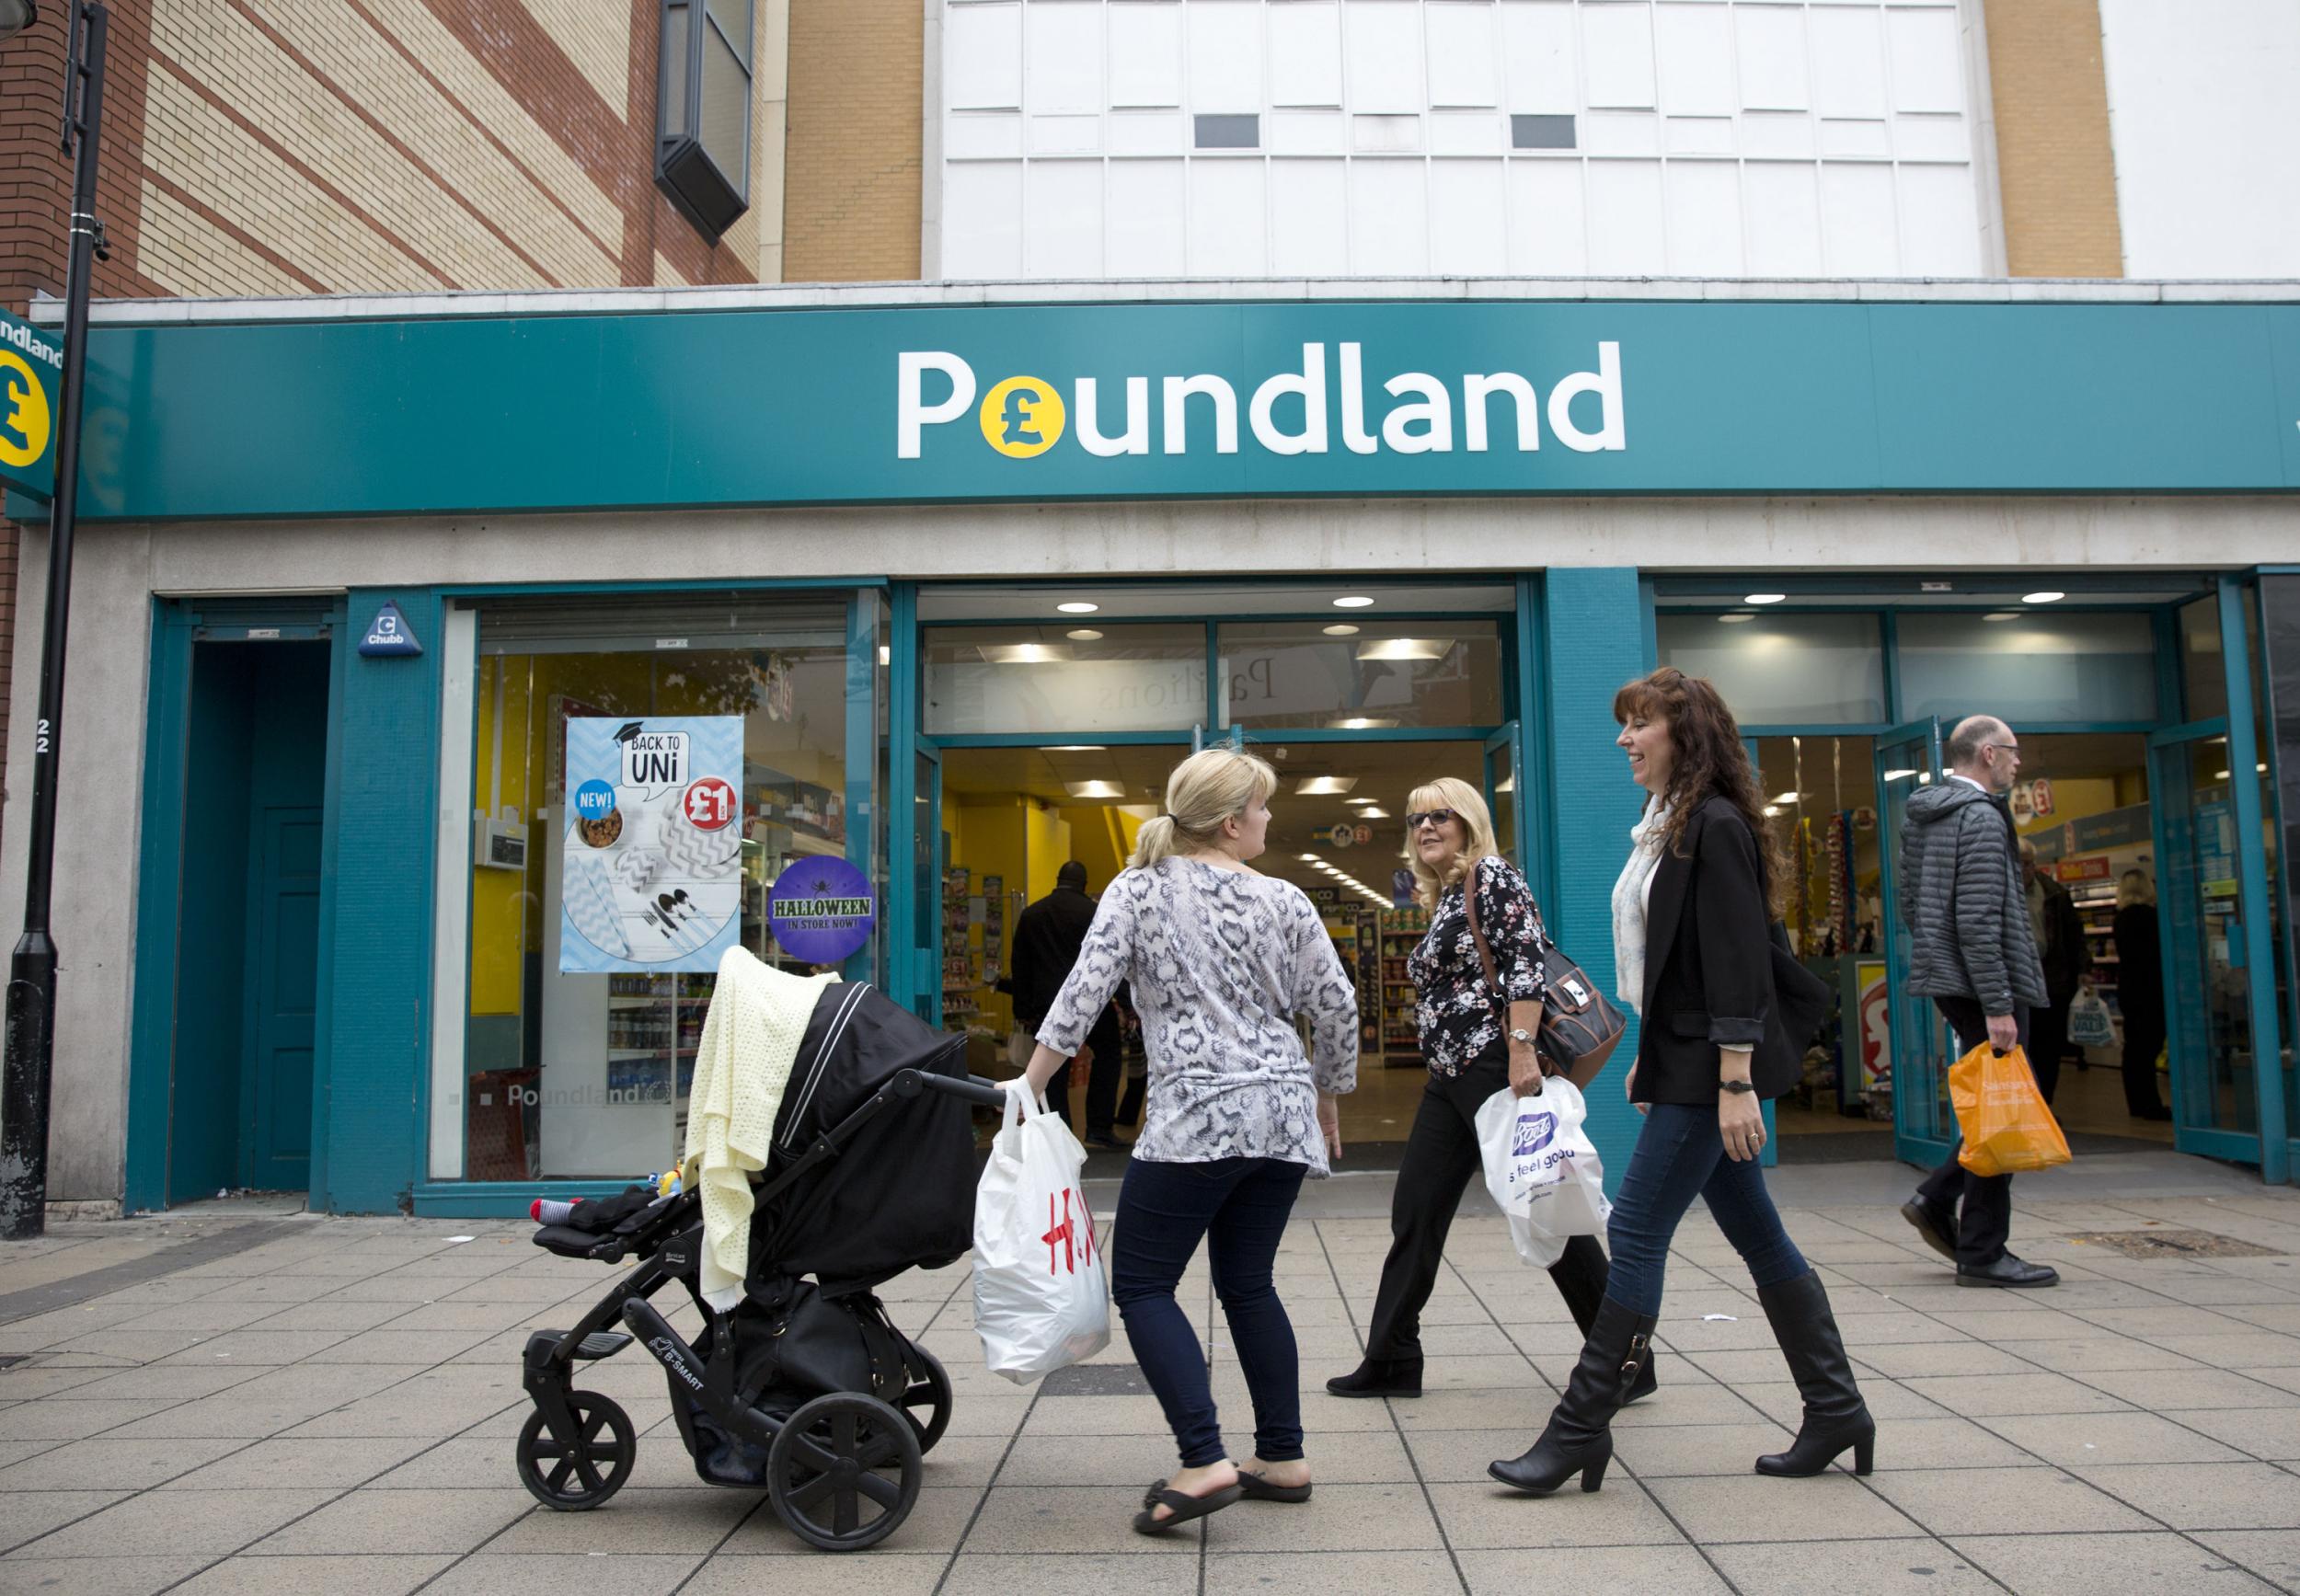 Poundland defends its tone of humour as 'British'